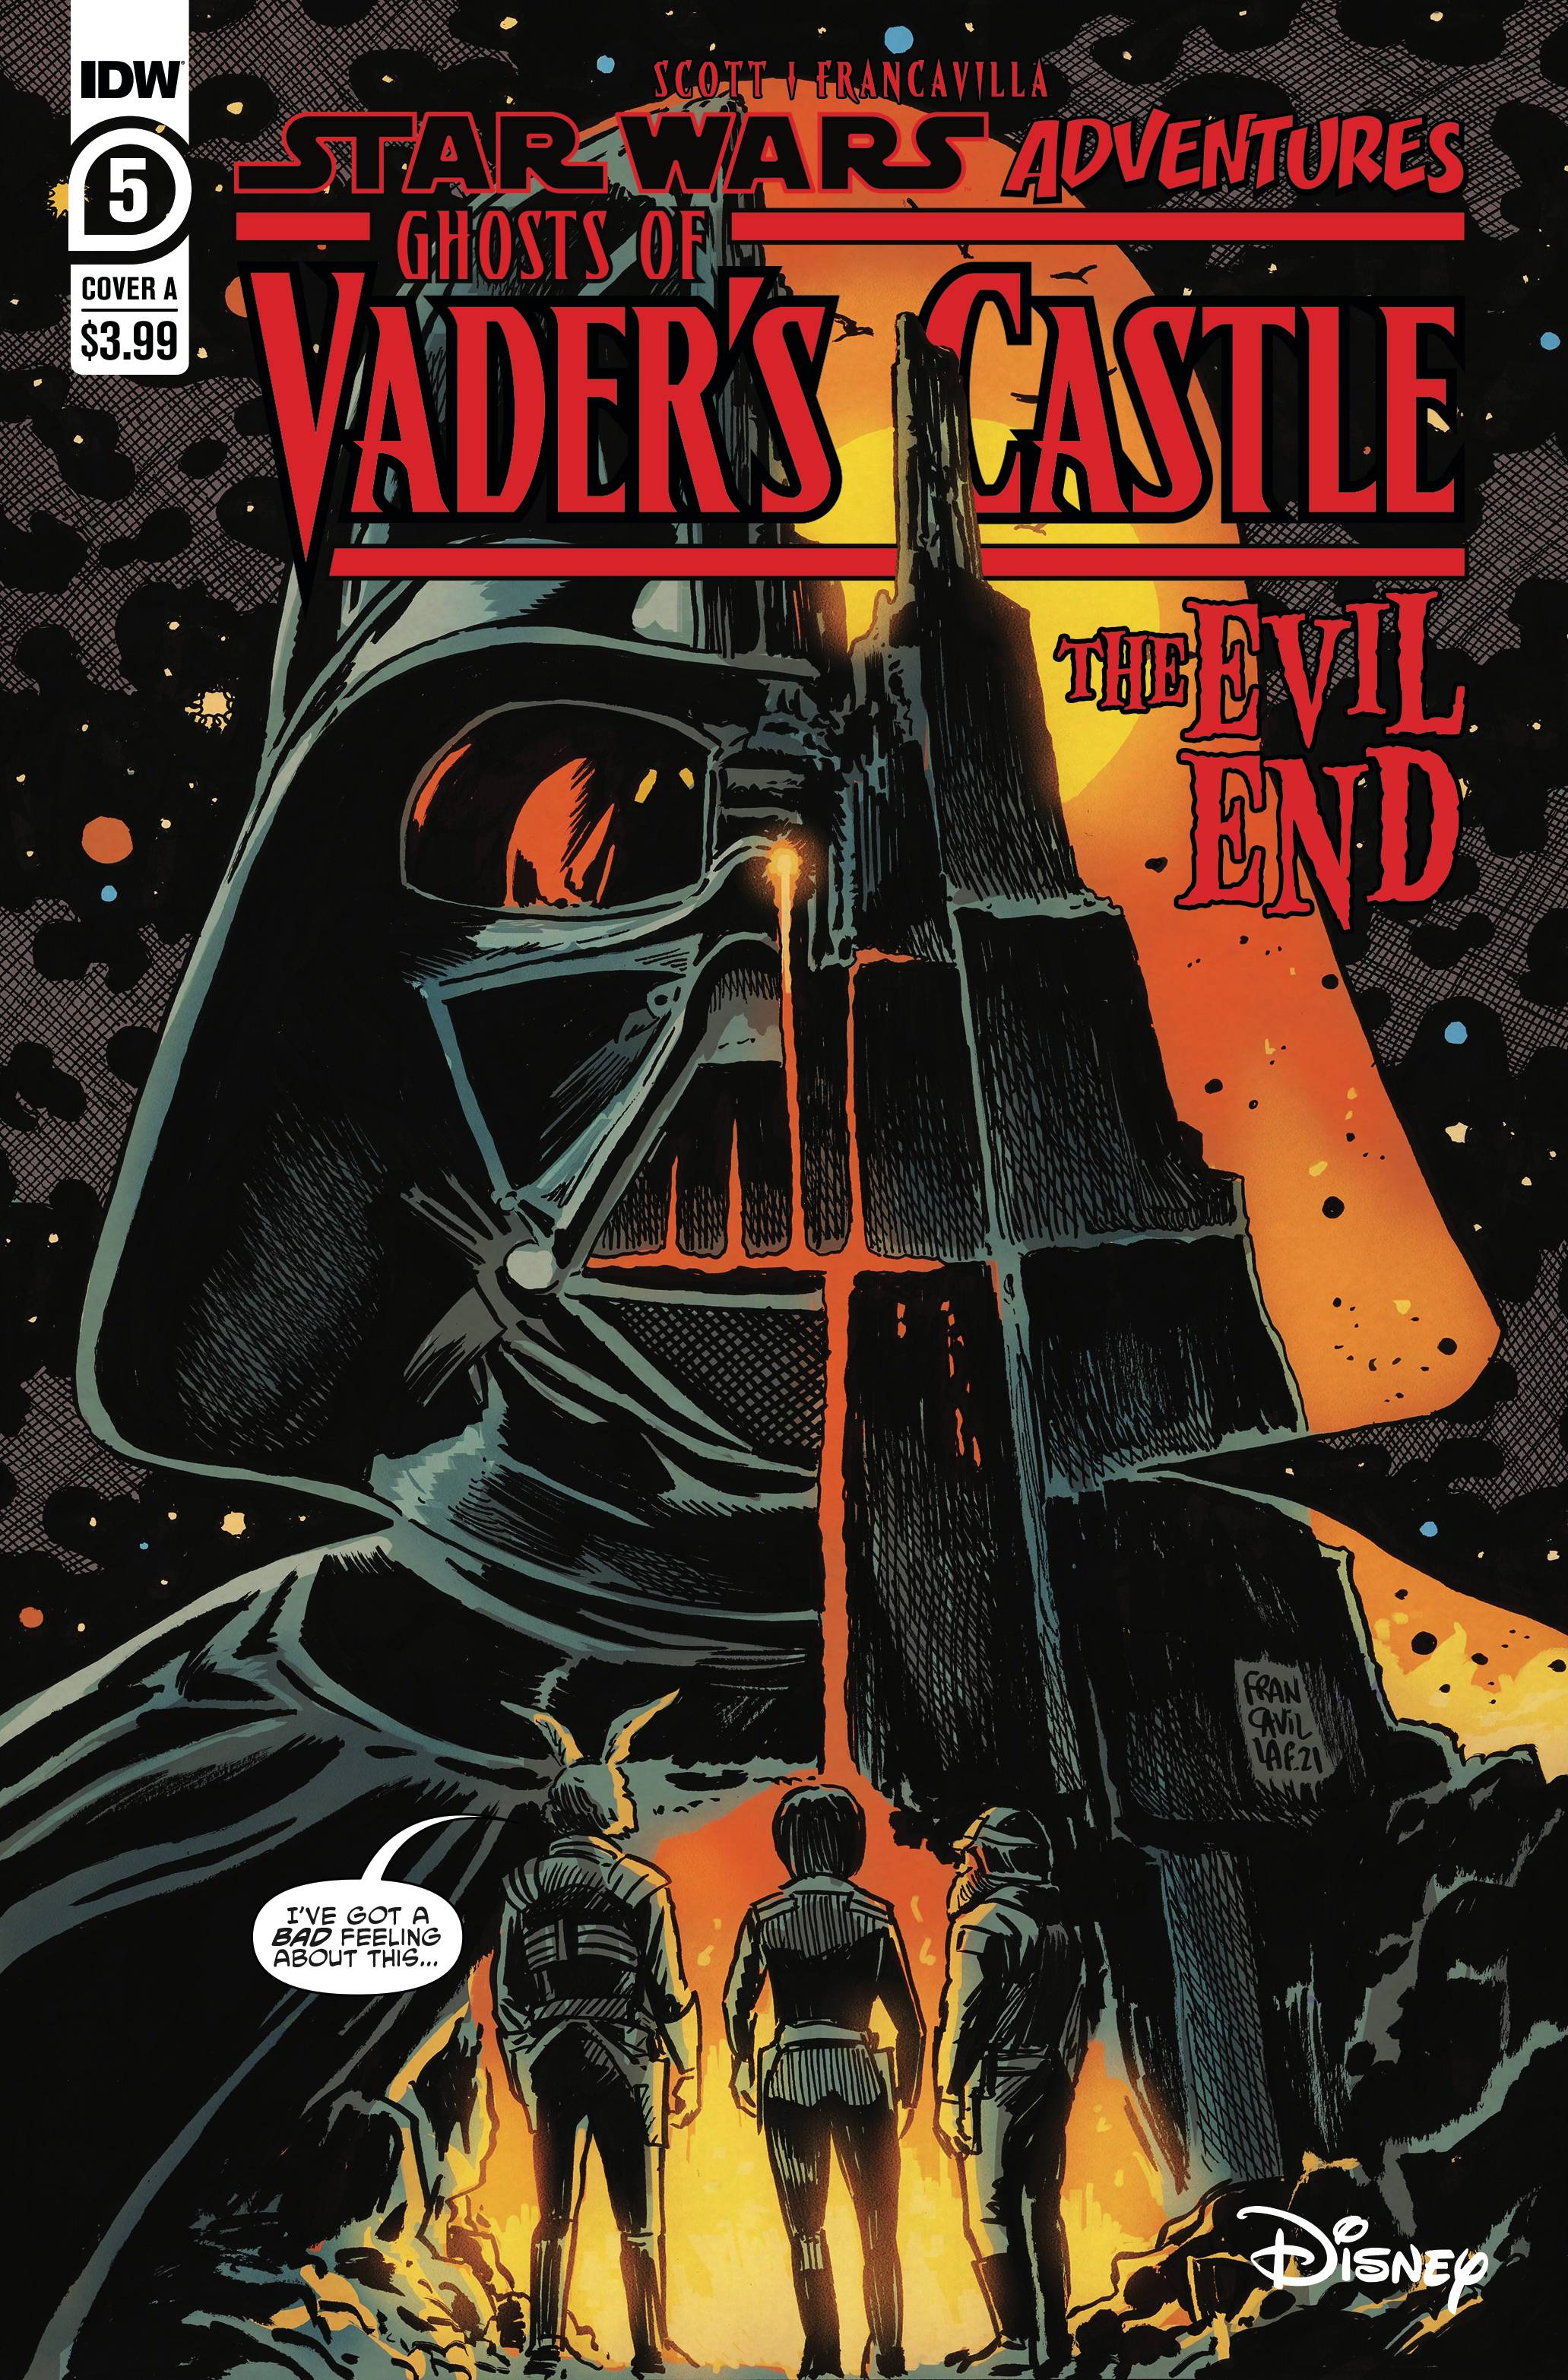 Star Wars Adventure Ghost Vaders Castle #5 Cover A Francavilla (Of 5)